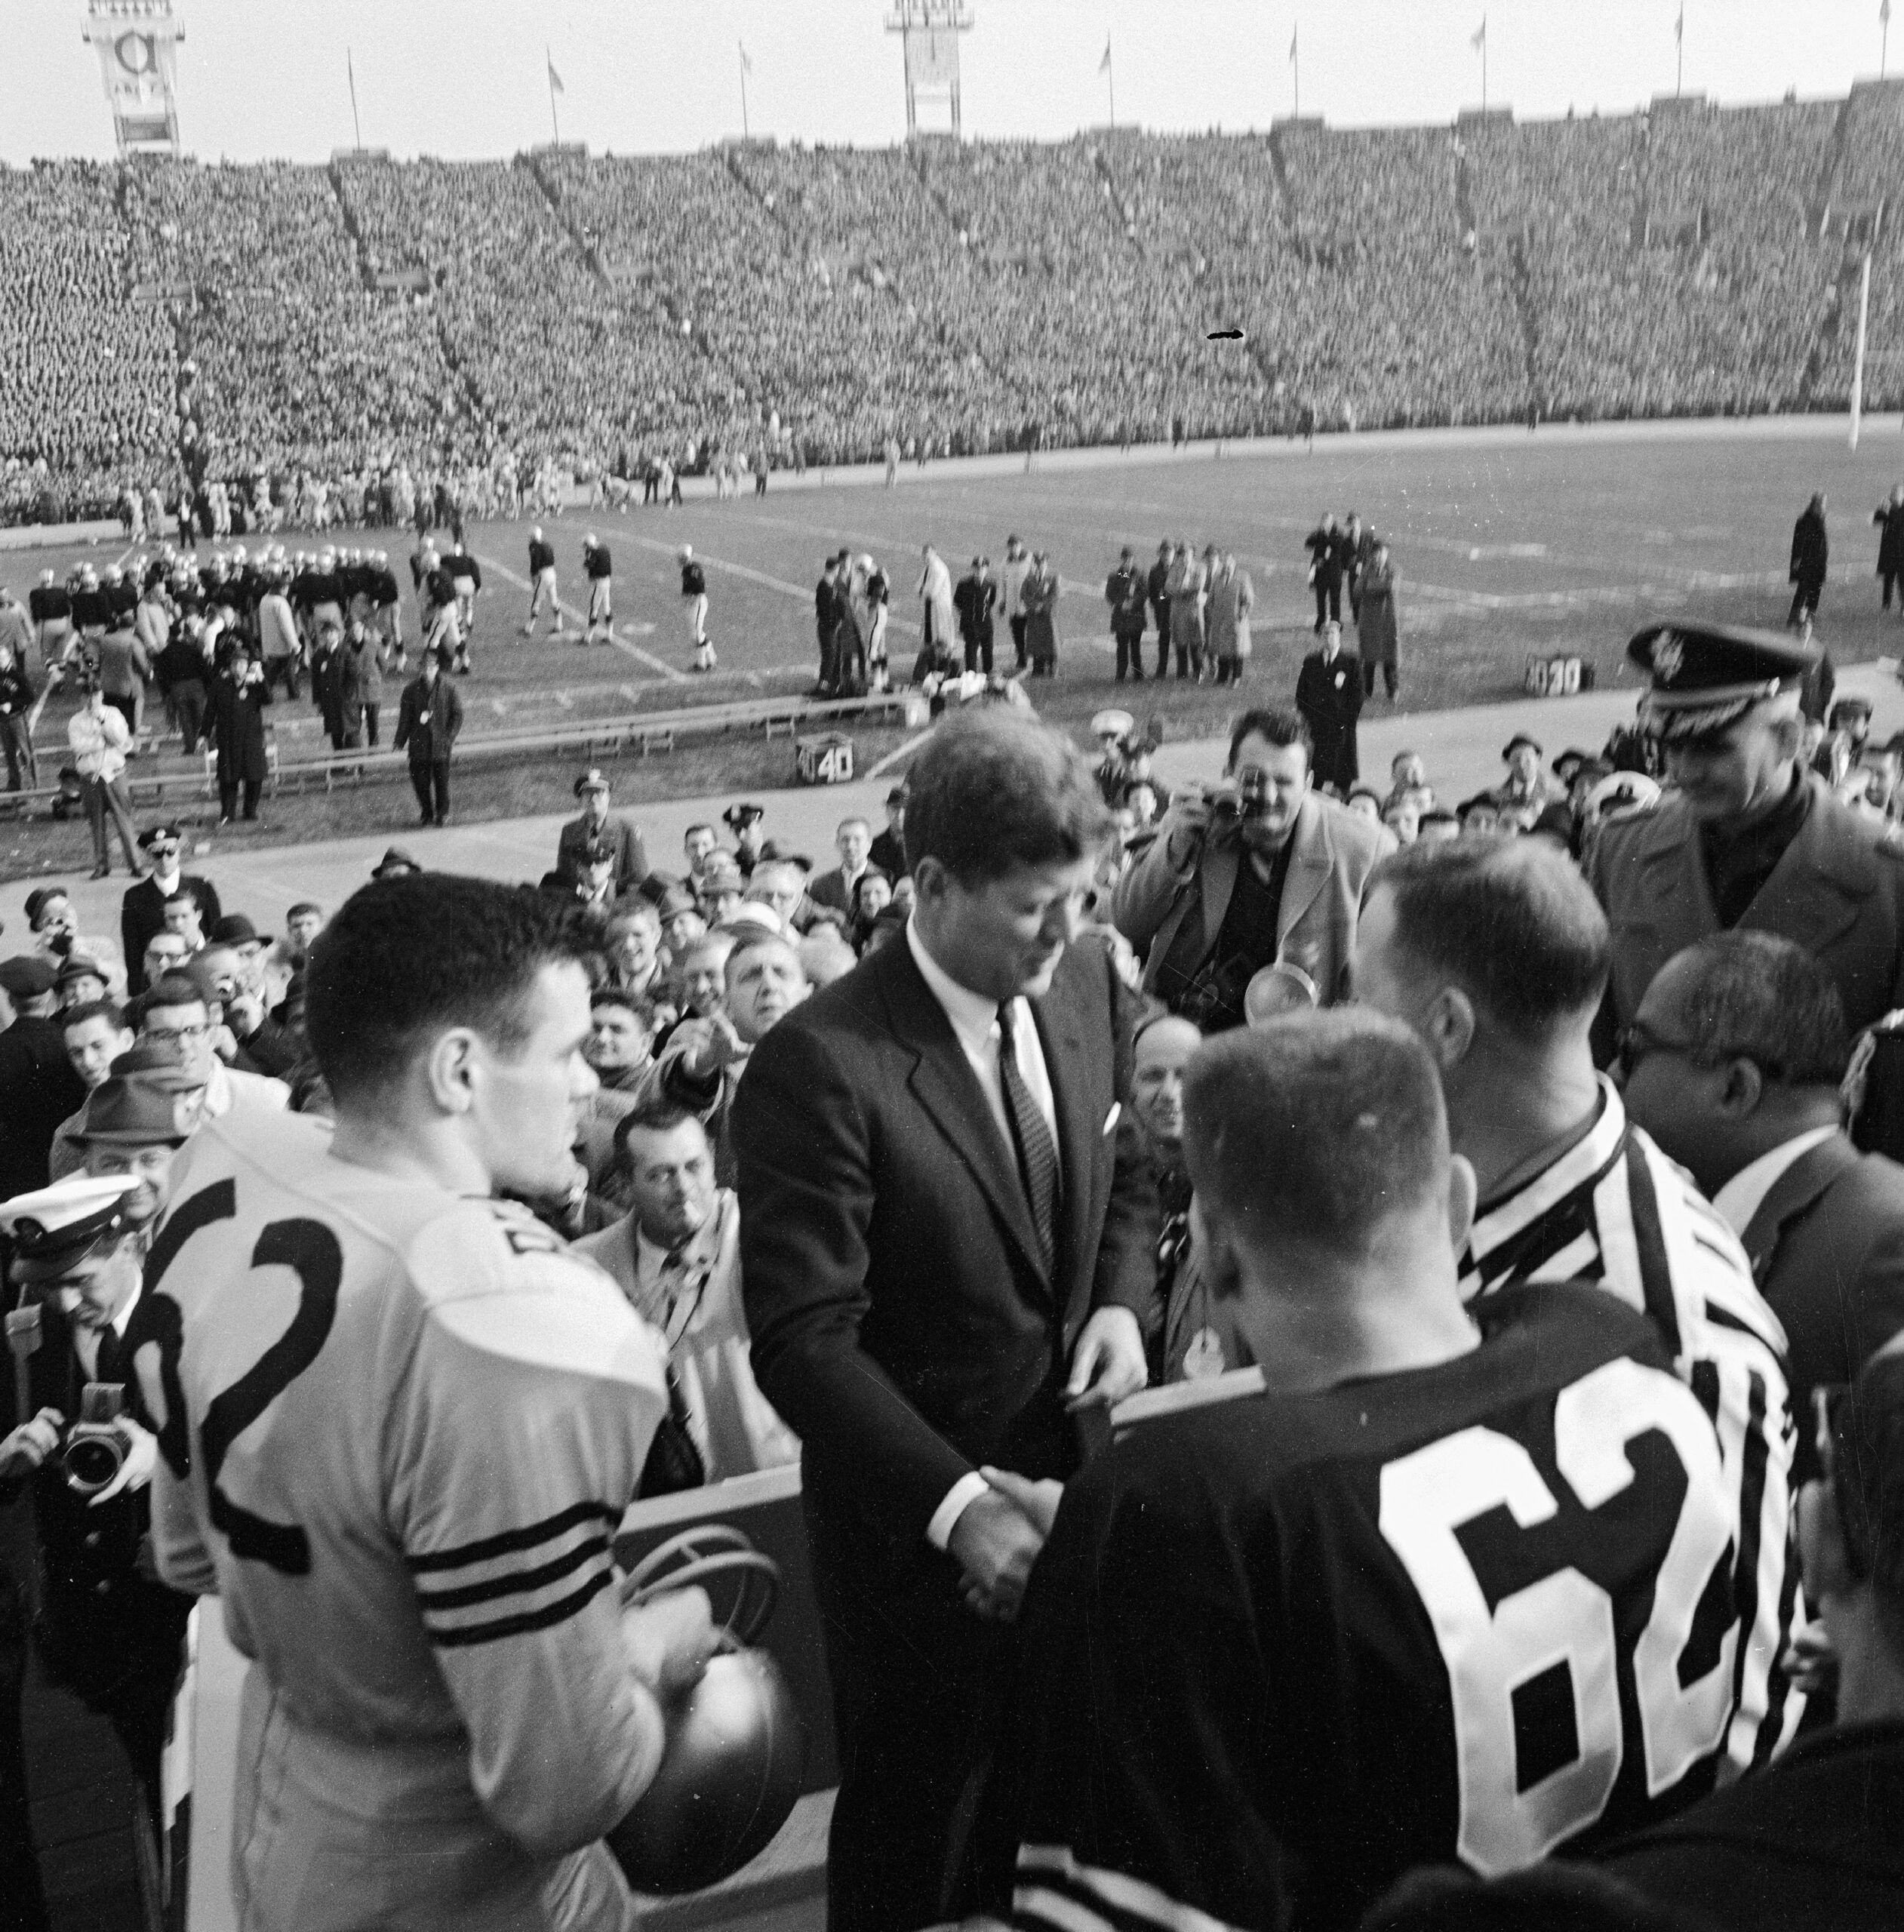 JFK at the Army/Navy Game - National Archives Identifier: 6817180